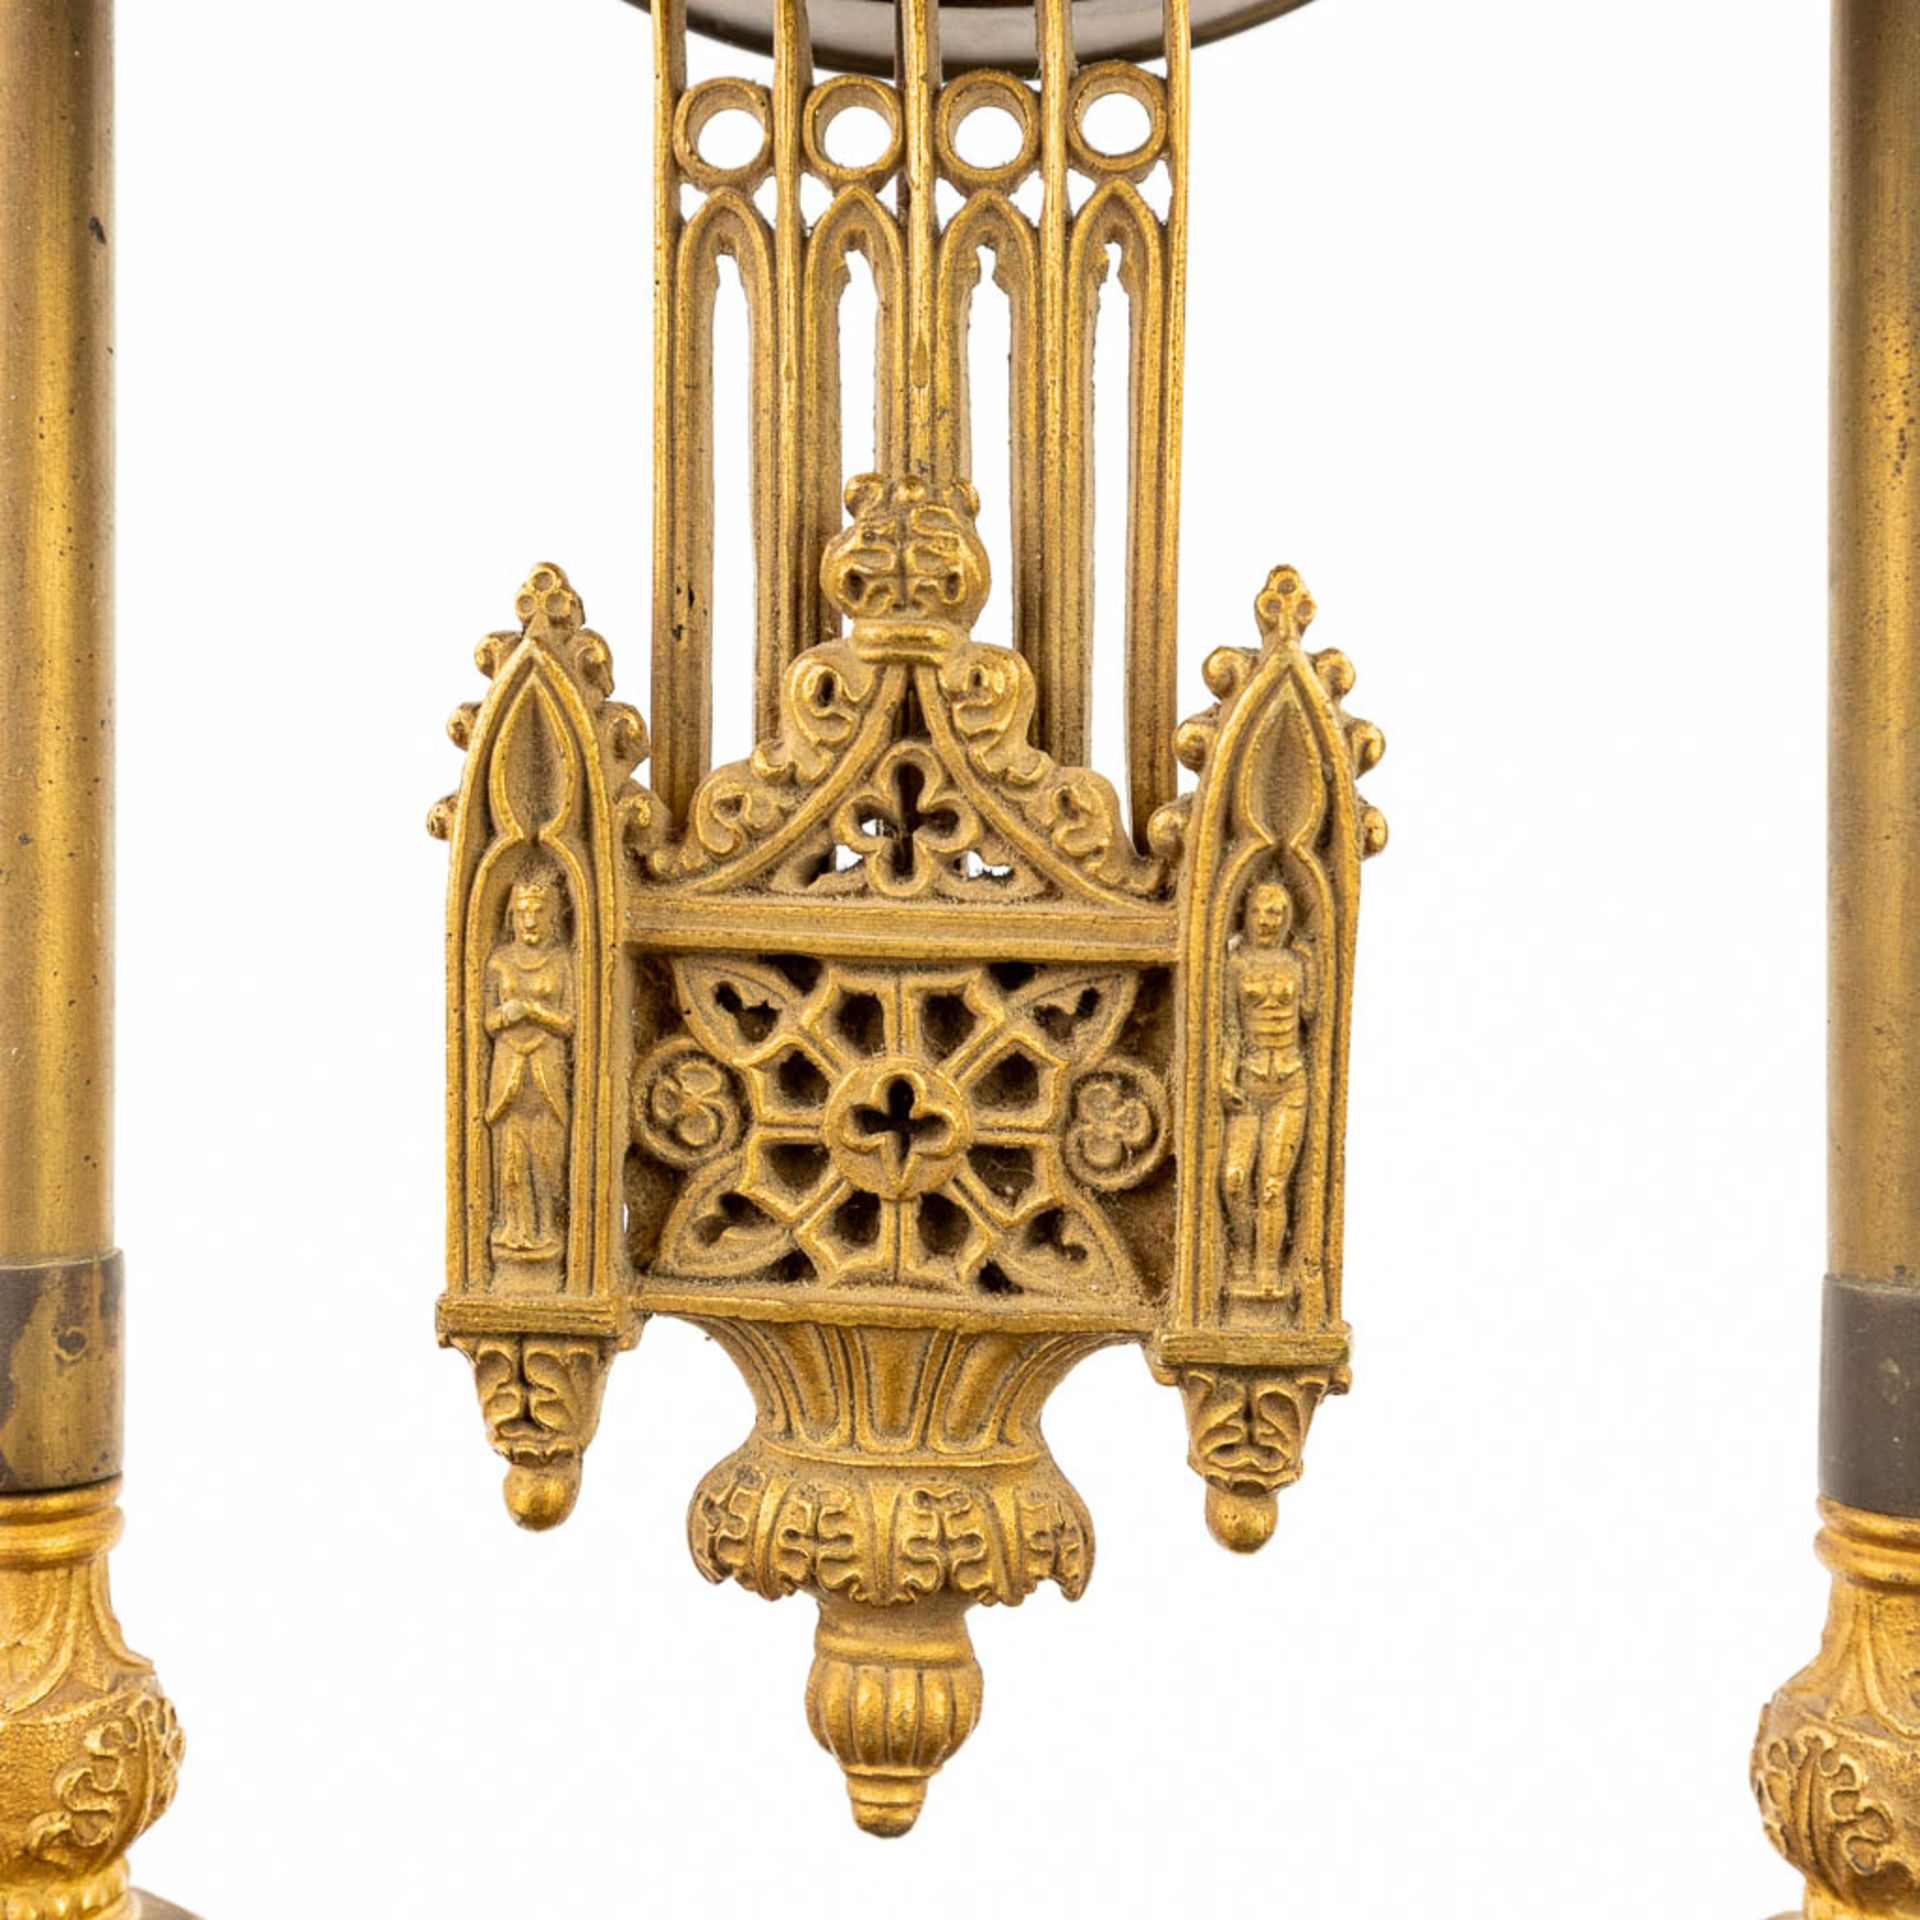 A table column clock made of gilt bronze in a gothic revival style. (11 x 19,5 x 43cm) - Image 8 of 15